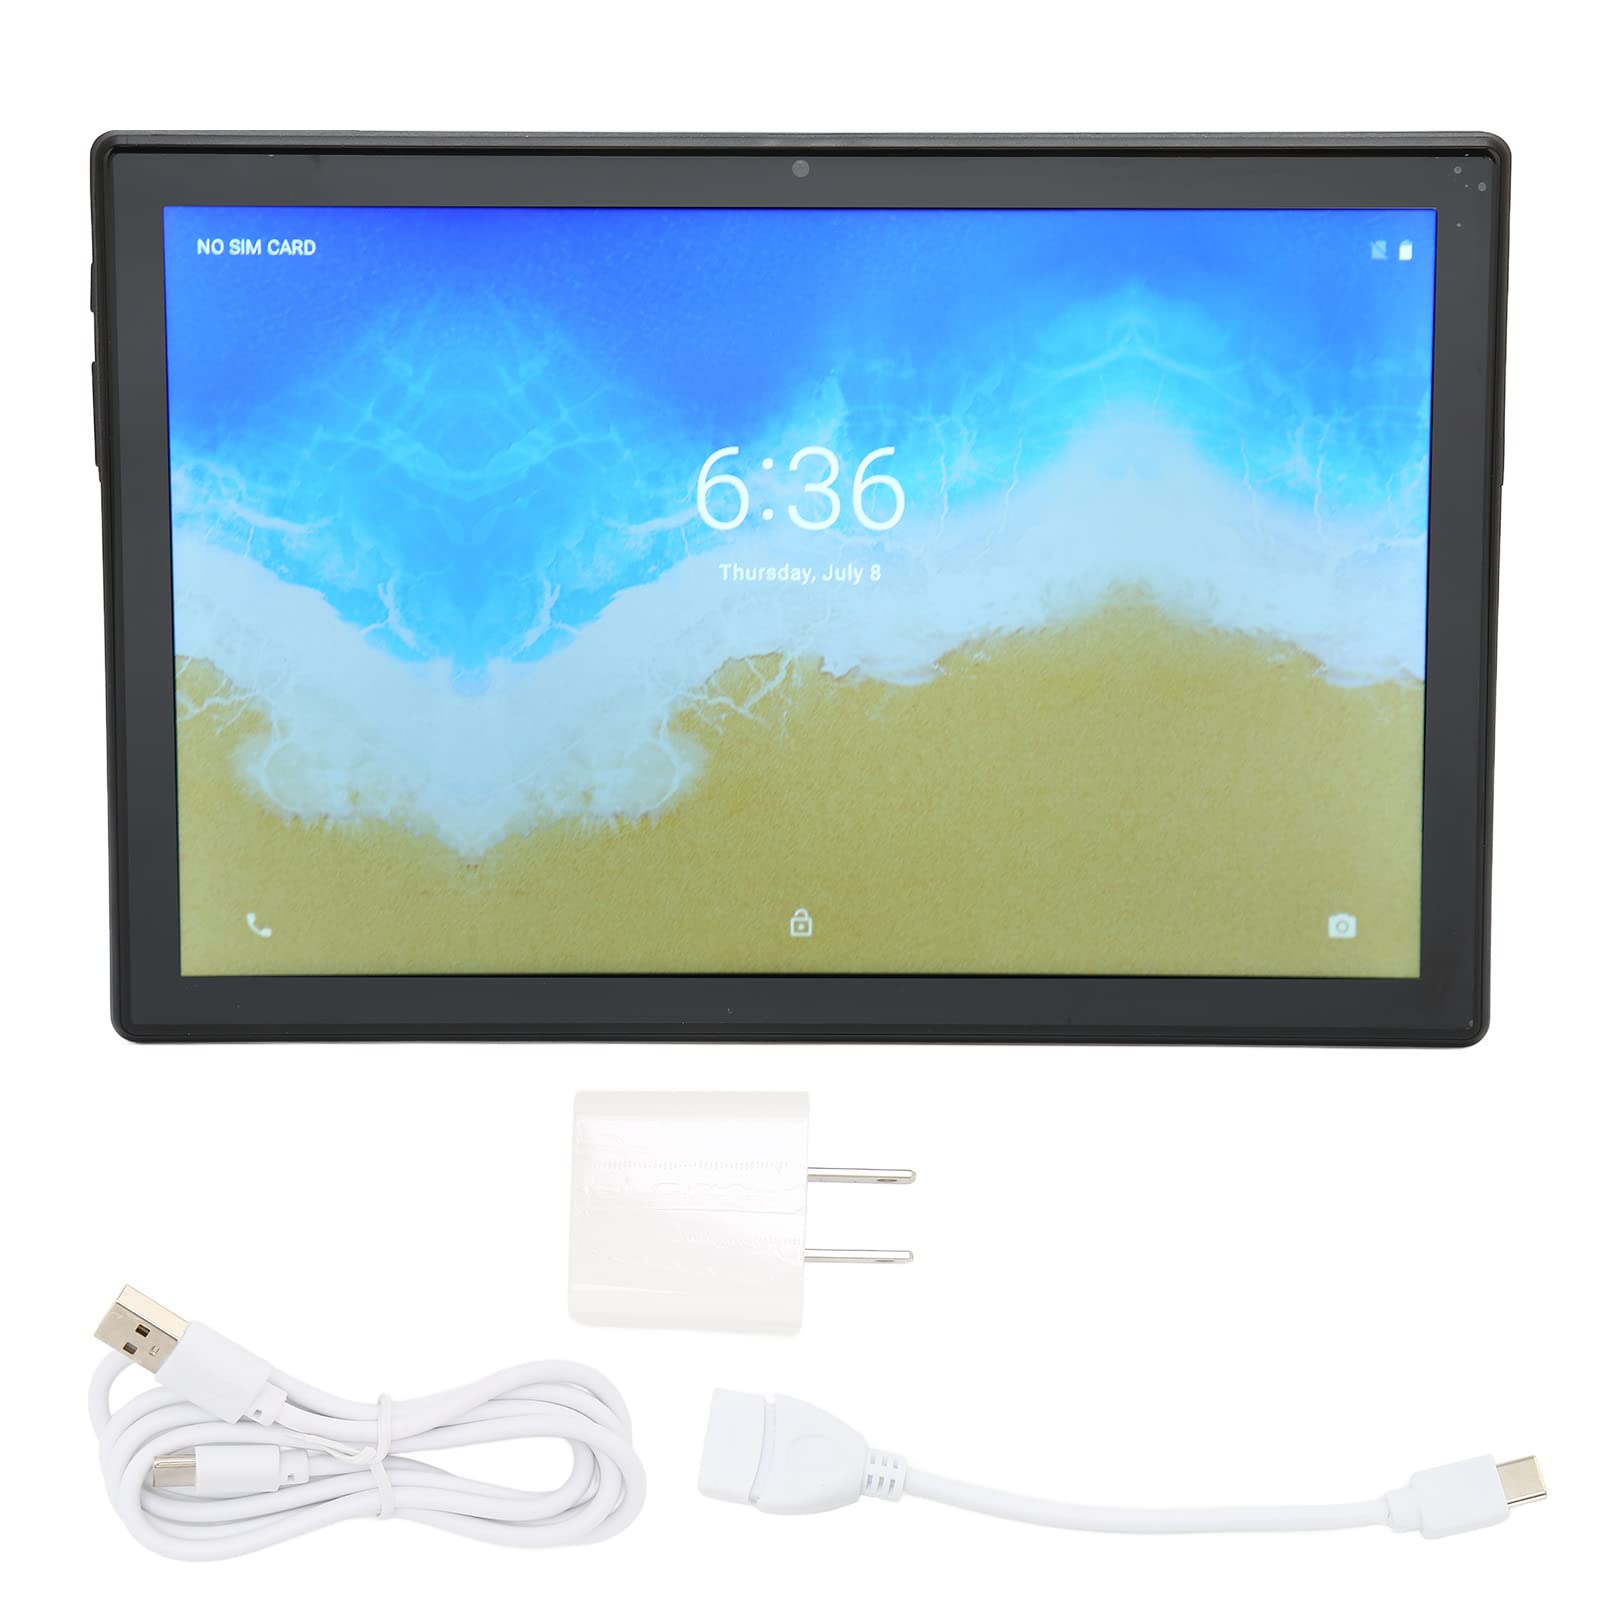 HD Tablet, Tablet PC 4G RAM 128G ROM WiFi 5G Dual Band Home for Gaming (US Plug)